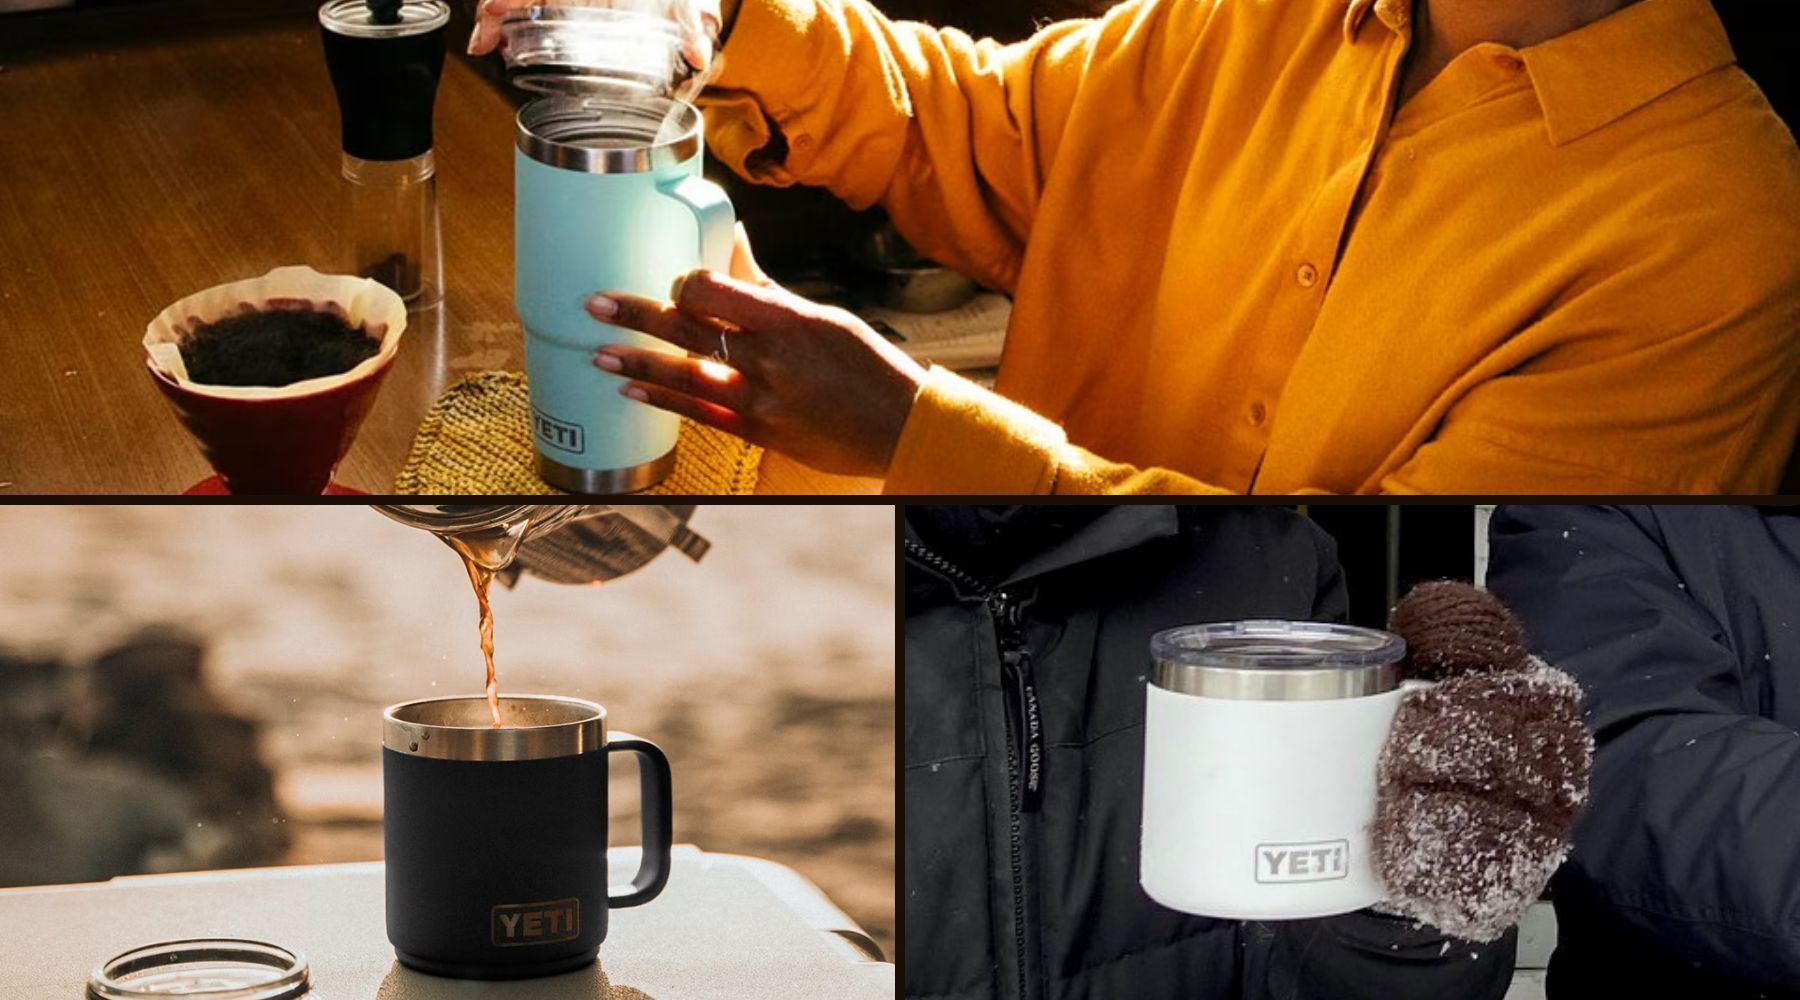 Yeti Mugs with handles available in different sizes - Visit the Yeti Store on Amazon, click image